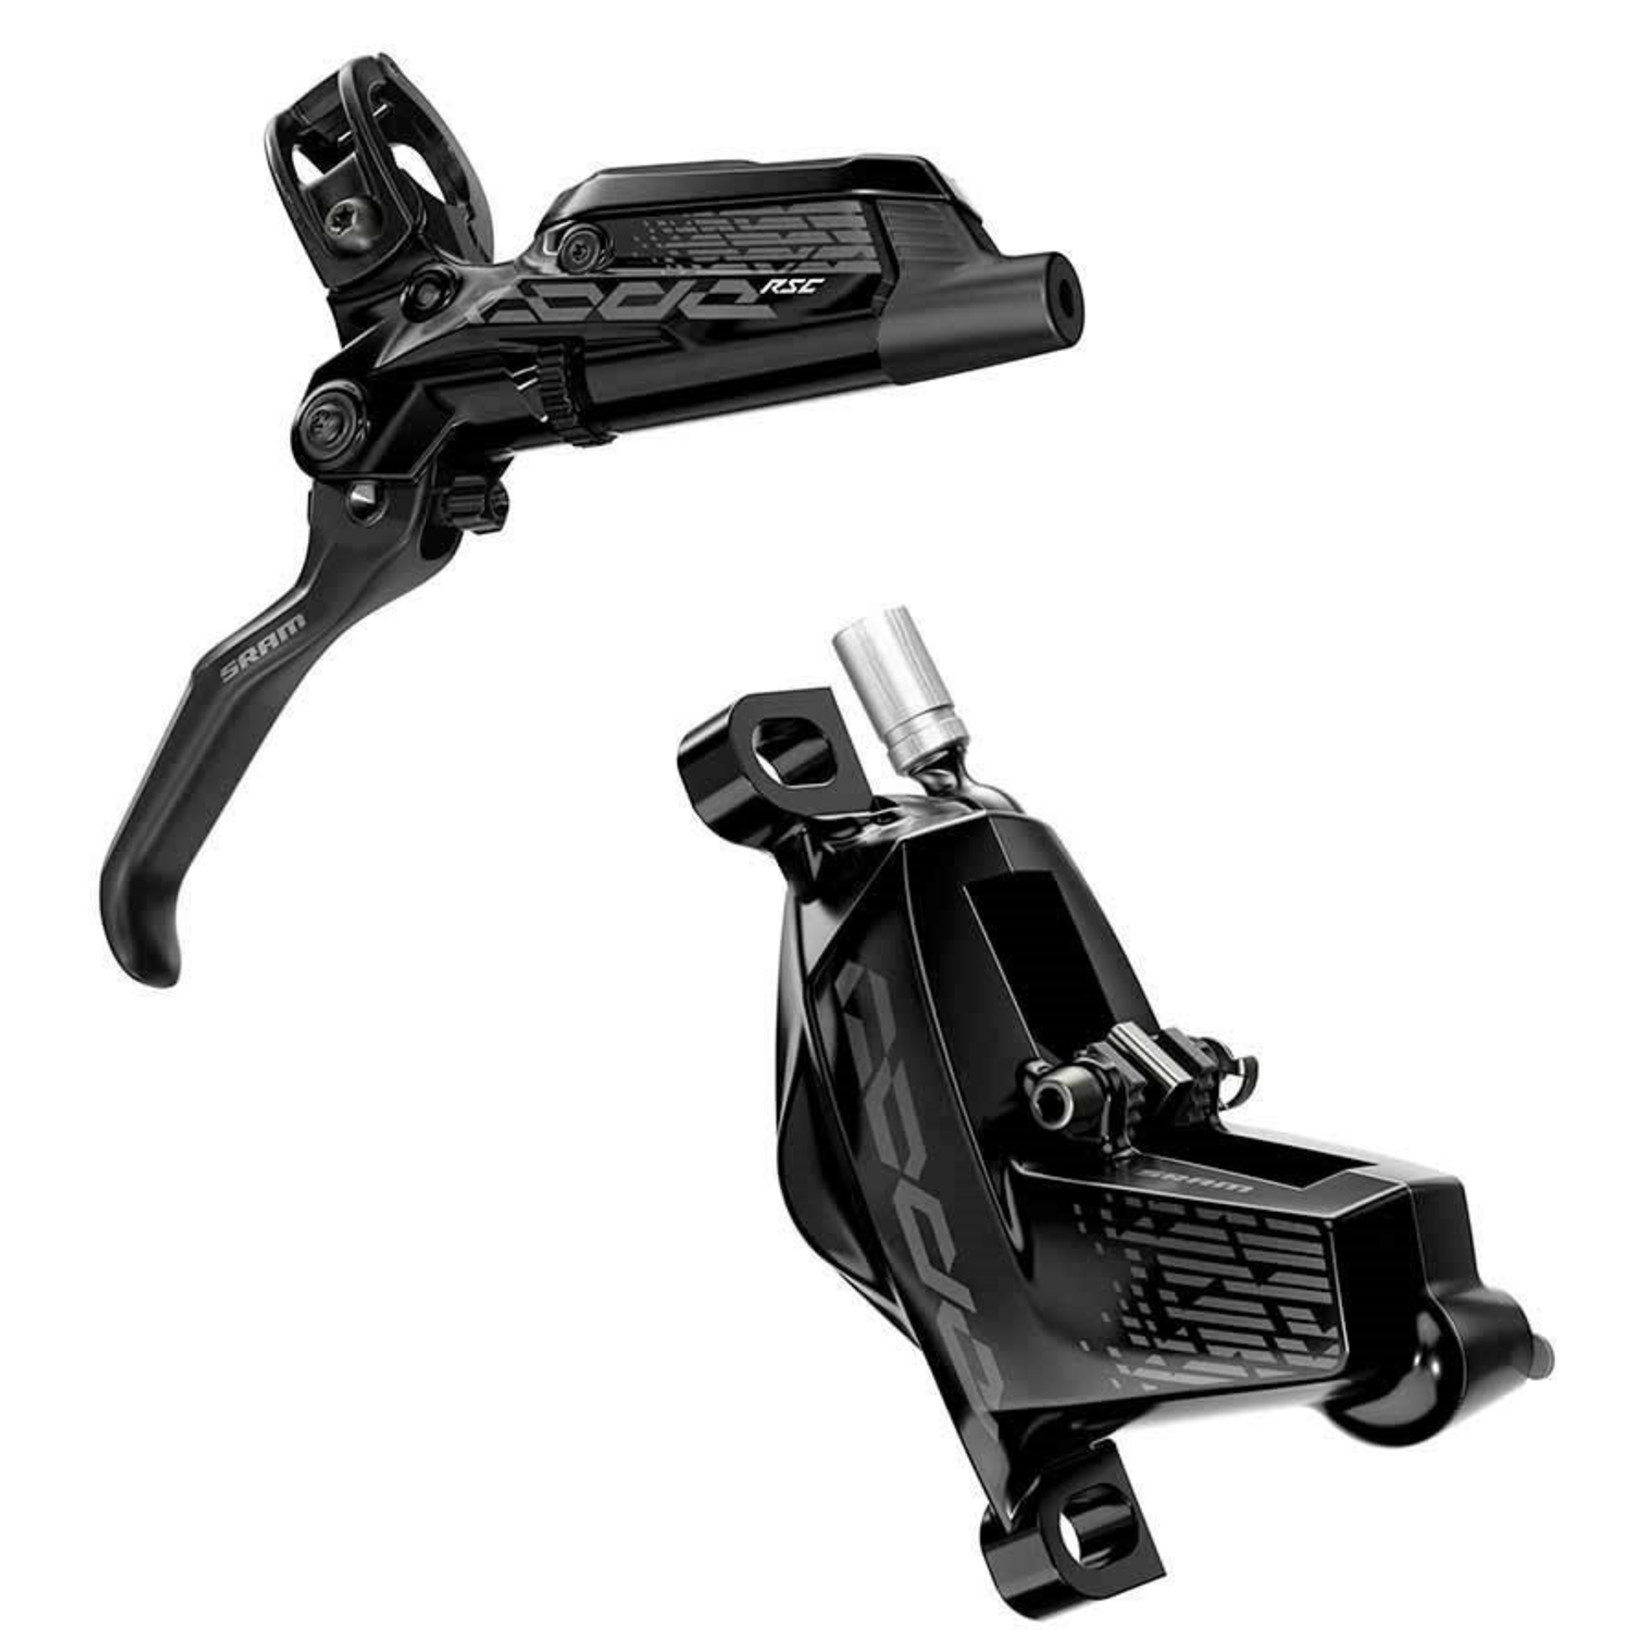 SRAM SRAM Code RSC Disc Brake and Lever - Front or Rear Hydraulic Post Mount Black A1